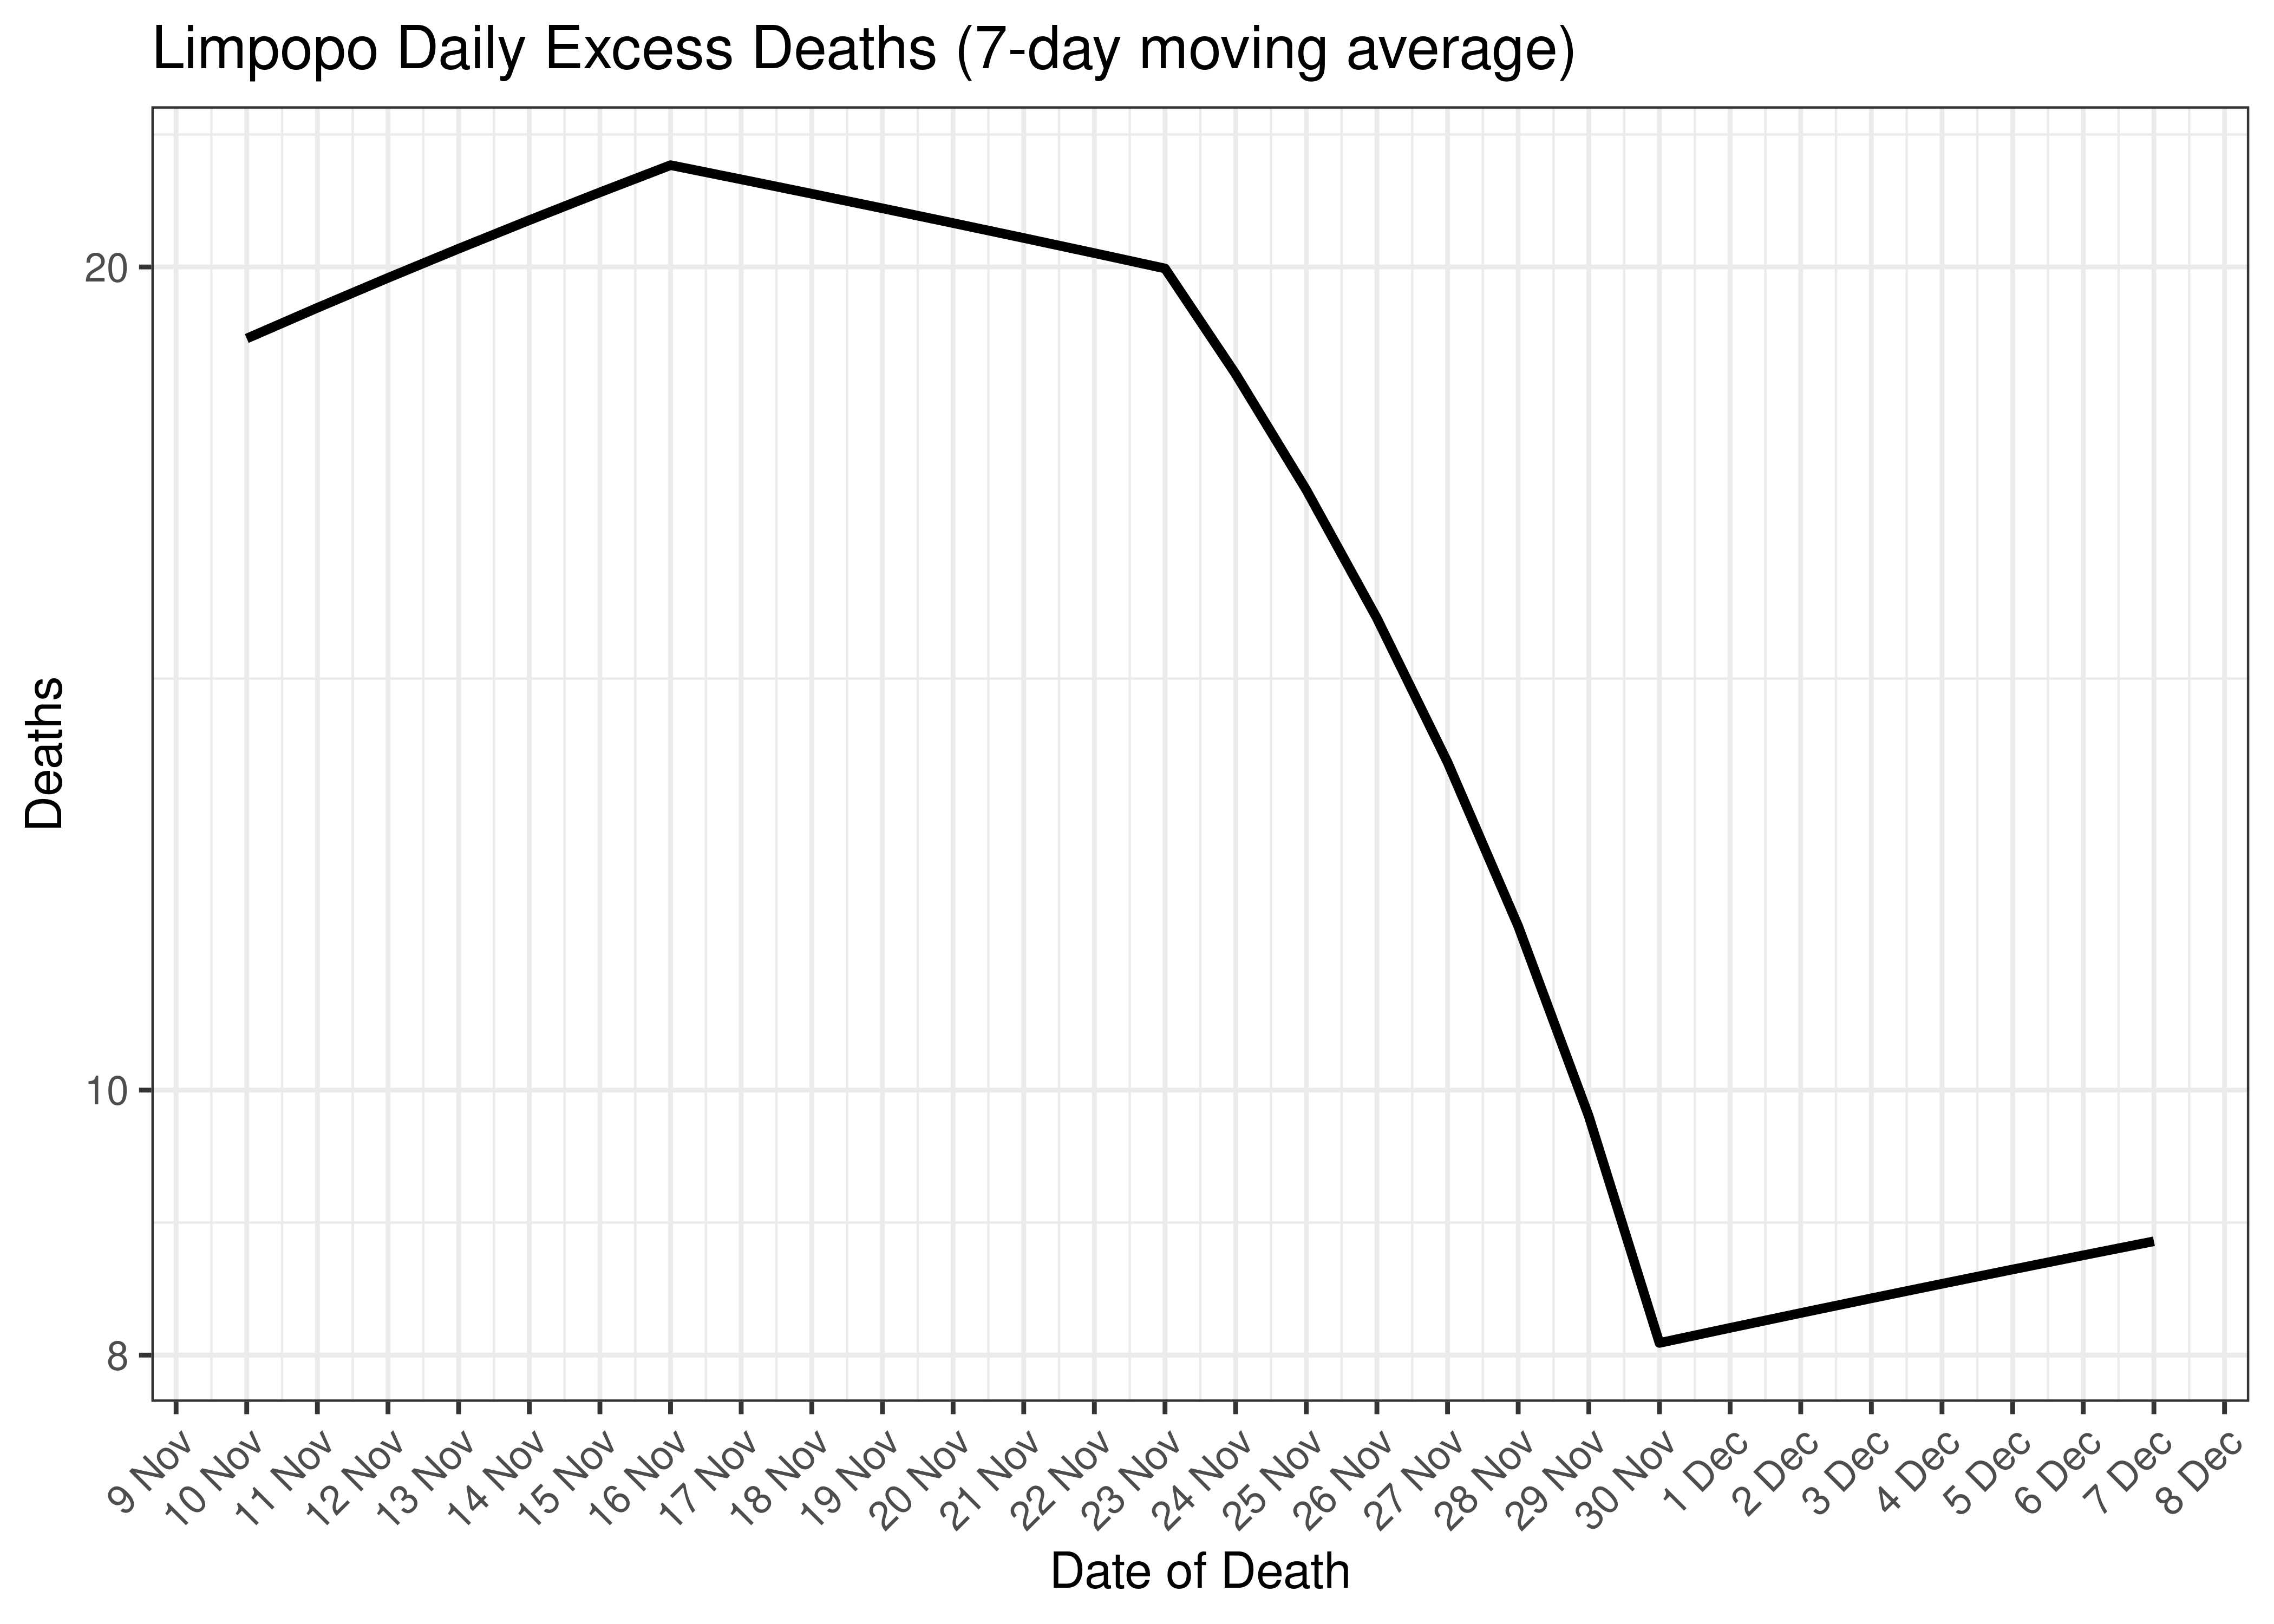 Limpopo Daily Excess Deaths for Last 30-days (7-day moving average)